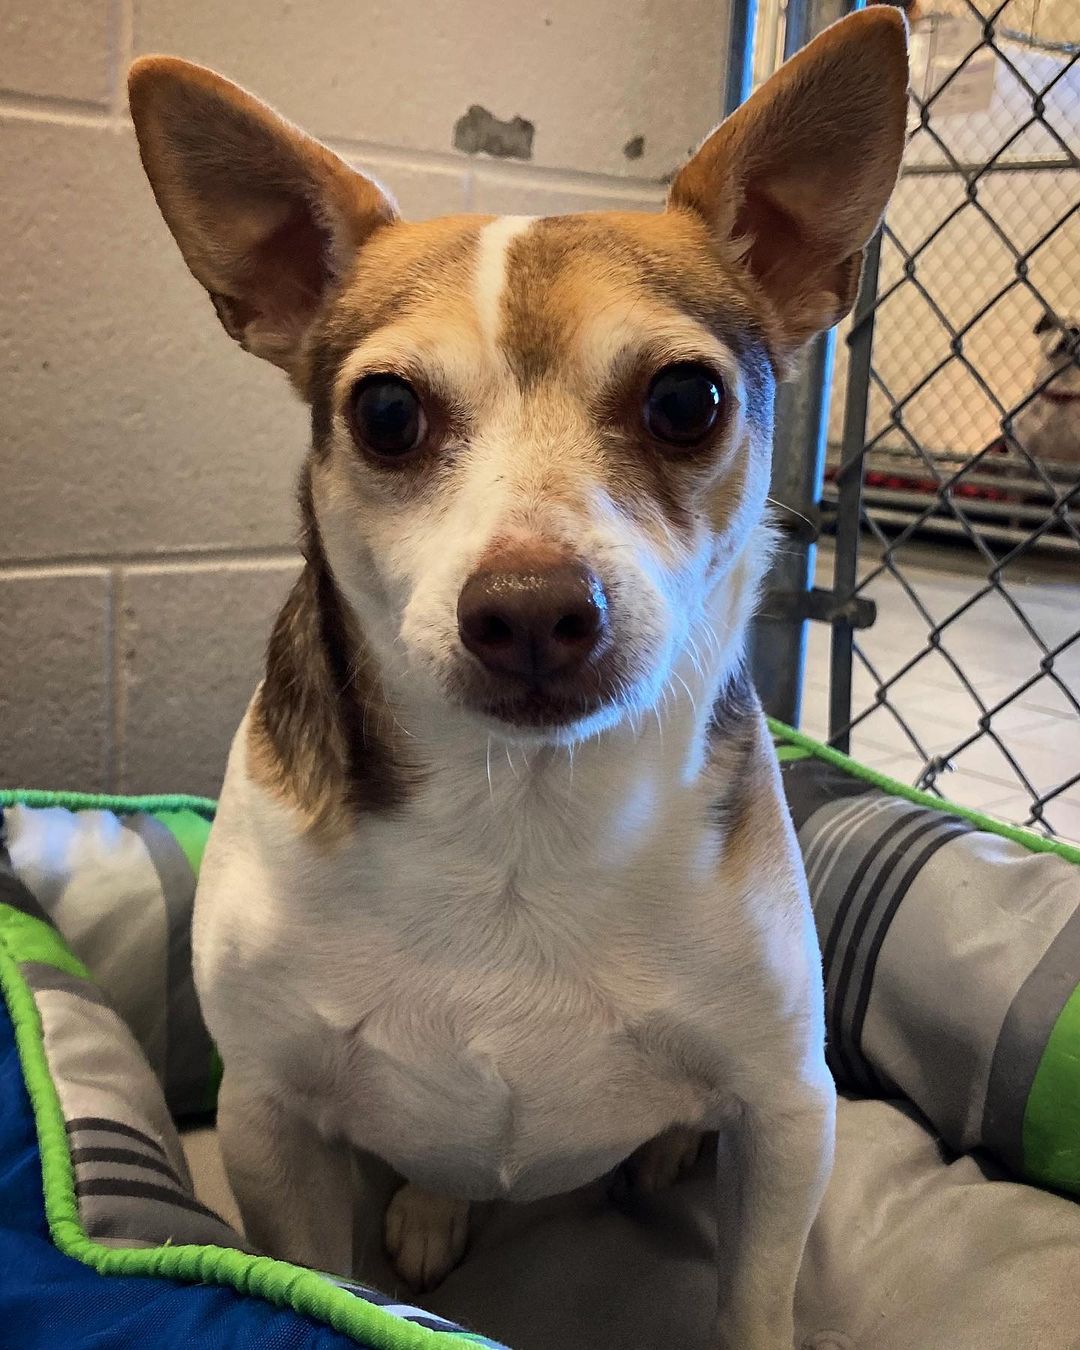 Adagio is just patiently waiting for his forever home to find him. ❤️ He was rescued from a dog hoarding case and is the gentlest little gentleman. 🐕

Wanna meet him? Call 231-946-5116 to set up a time to see if he’s the right fit for you! ❤️ Or check out his bio and our other dogs for adoption at Cherrylandhumane.org/adopt 

<a target='_blank' href='https://www.instagram.com/explore/tags/cherrylandhumanesociety/'>#cherrylandhumanesociety</a> <a target='_blank' href='https://www.instagram.com/explore/tags/adoptcherryland/'>#adoptcherryland</a> <a target='_blank' href='https://www.instagram.com/explore/tags/adoptadog/'>#adoptadog</a> <a target='_blank' href='https://www.instagram.com/explore/tags/gentleman/'>#gentleman</a> <a target='_blank' href='https://www.instagram.com/explore/tags/sweetpup/'>#sweetpup</a> <a target='_blank' href='https://www.instagram.com/explore/tags/adoptdontshop/'>#adoptdontshop</a> <a target='_blank' href='https://www.instagram.com/explore/tags/smalldog/'>#smalldog</a> <a target='_blank' href='https://www.instagram.com/explore/tags/adopteddogsofinstagram/'>#adopteddogsofinstagram</a>